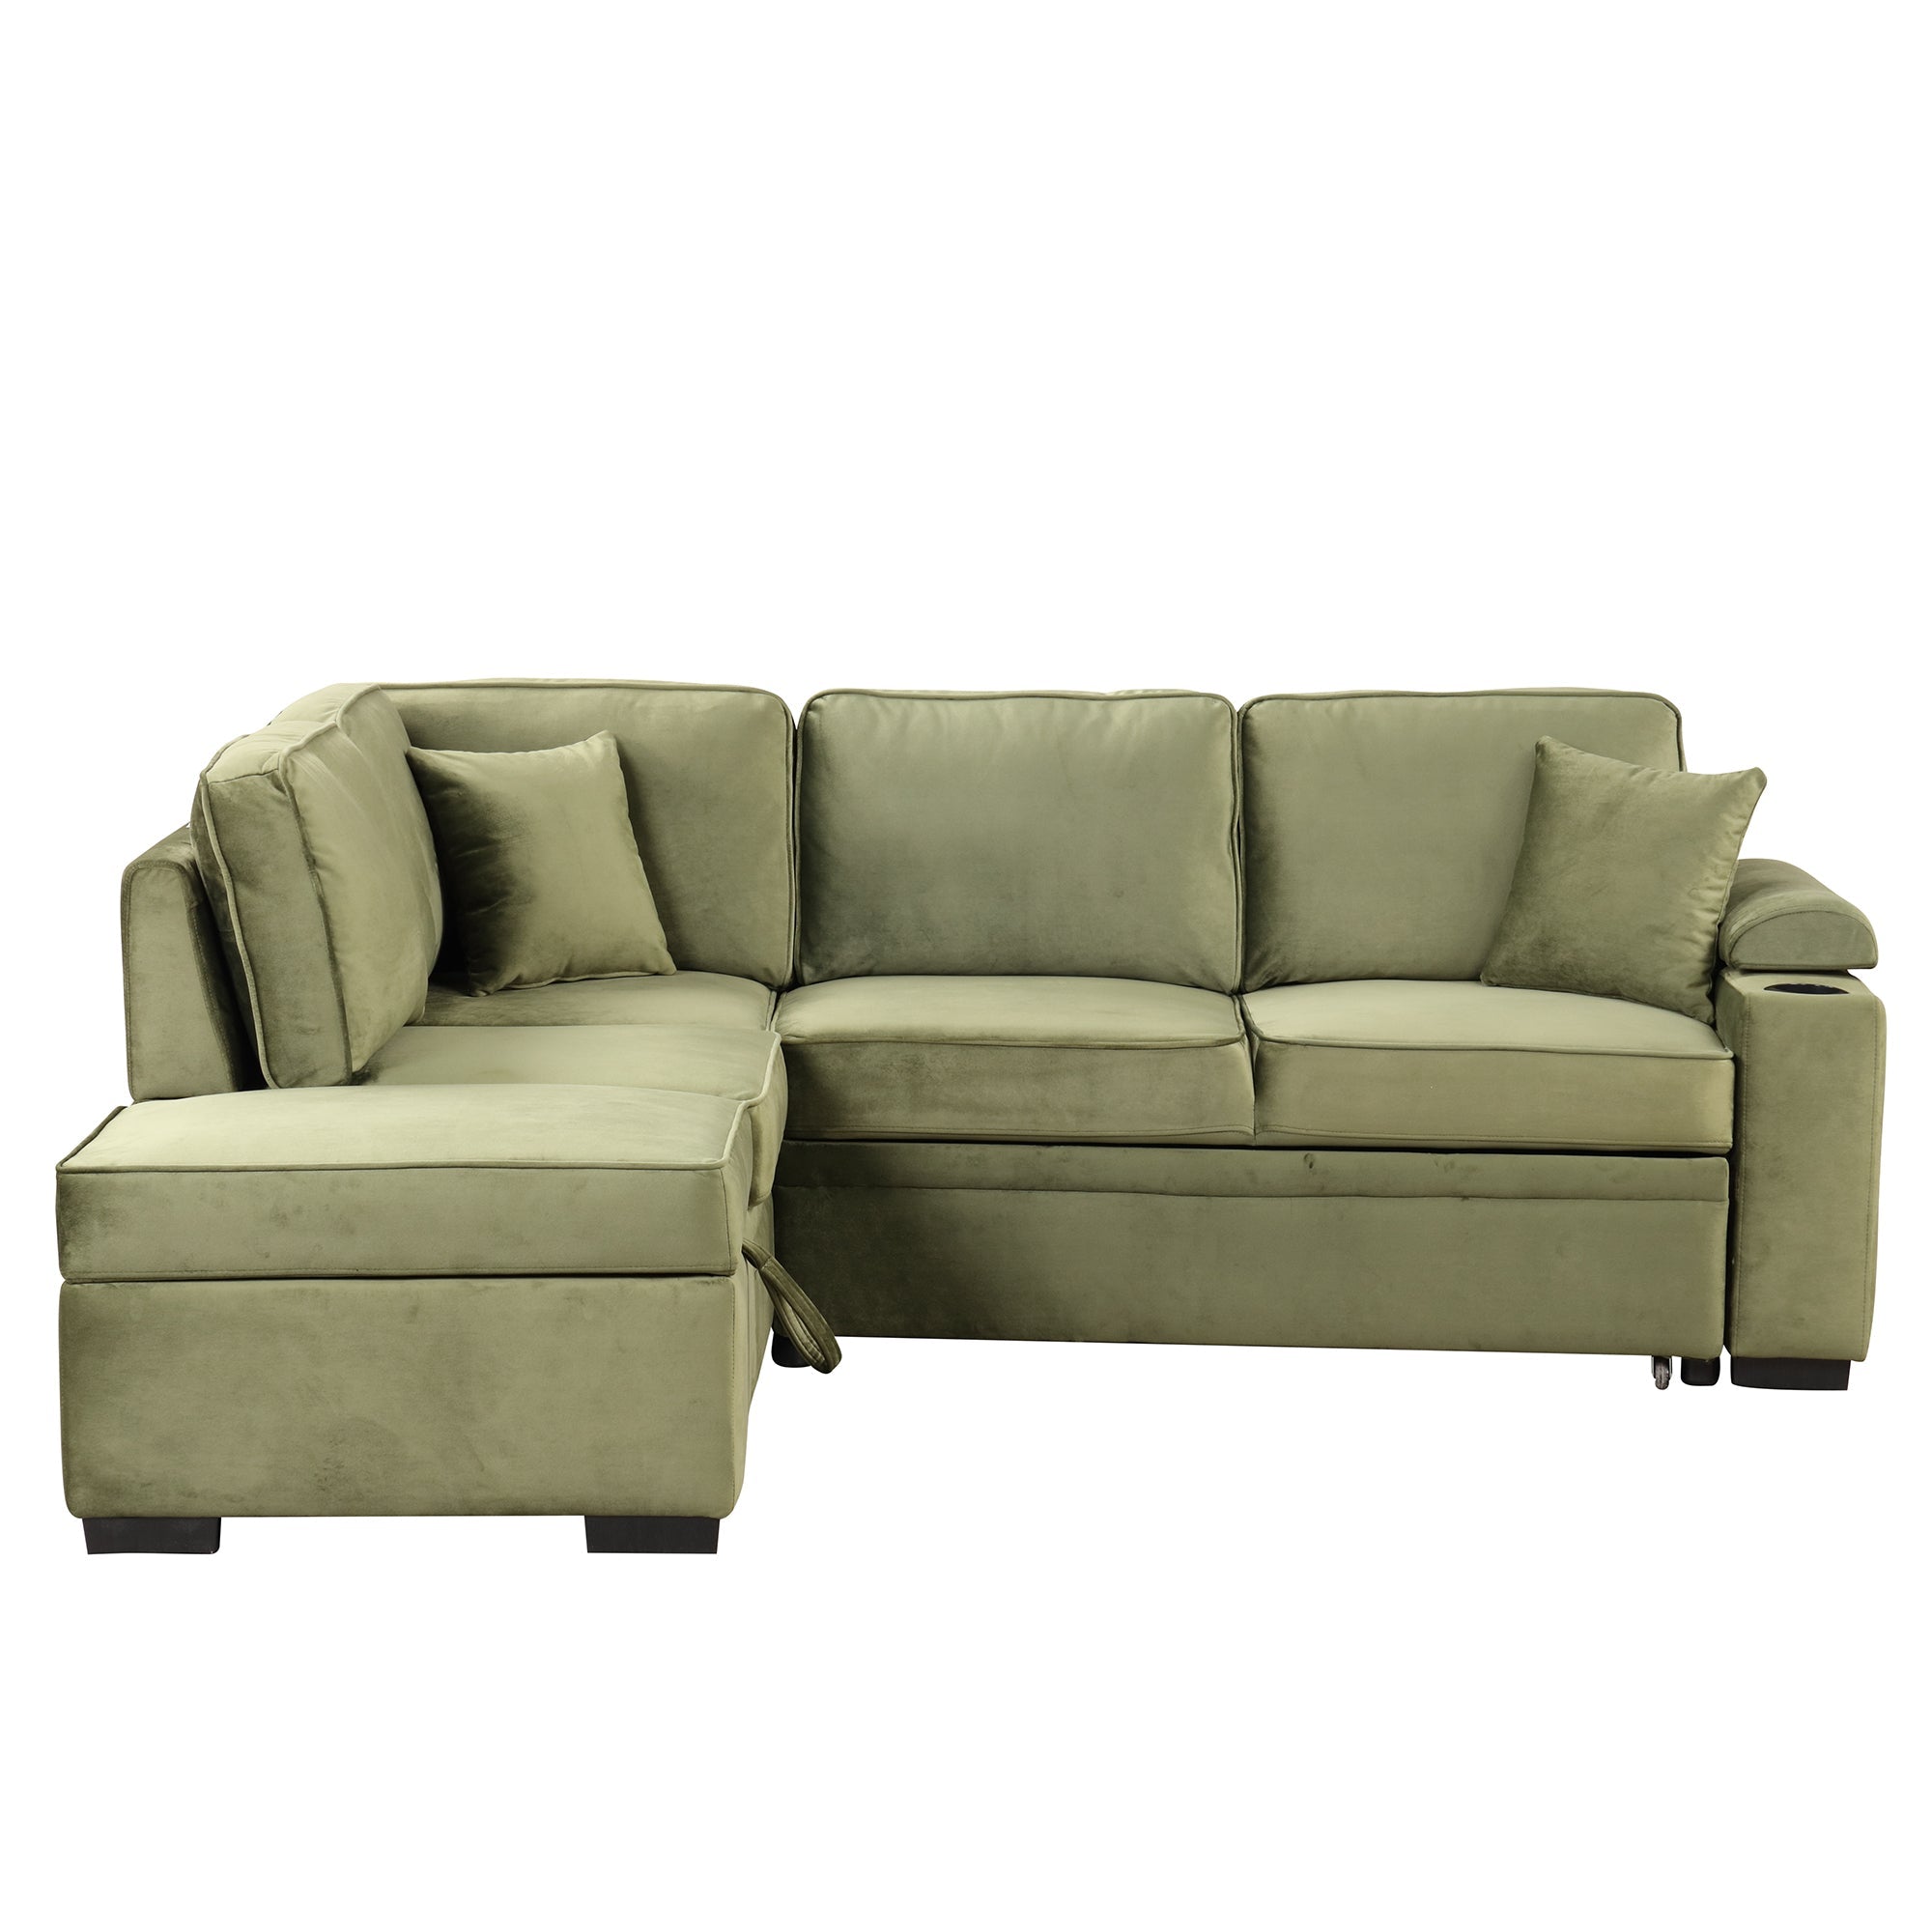 87.4" Green Velvet Sleeper Sectional Sofa L-Shaped w/ Storage Ottoman-Sleeper Sectionals-American Furniture Outlet